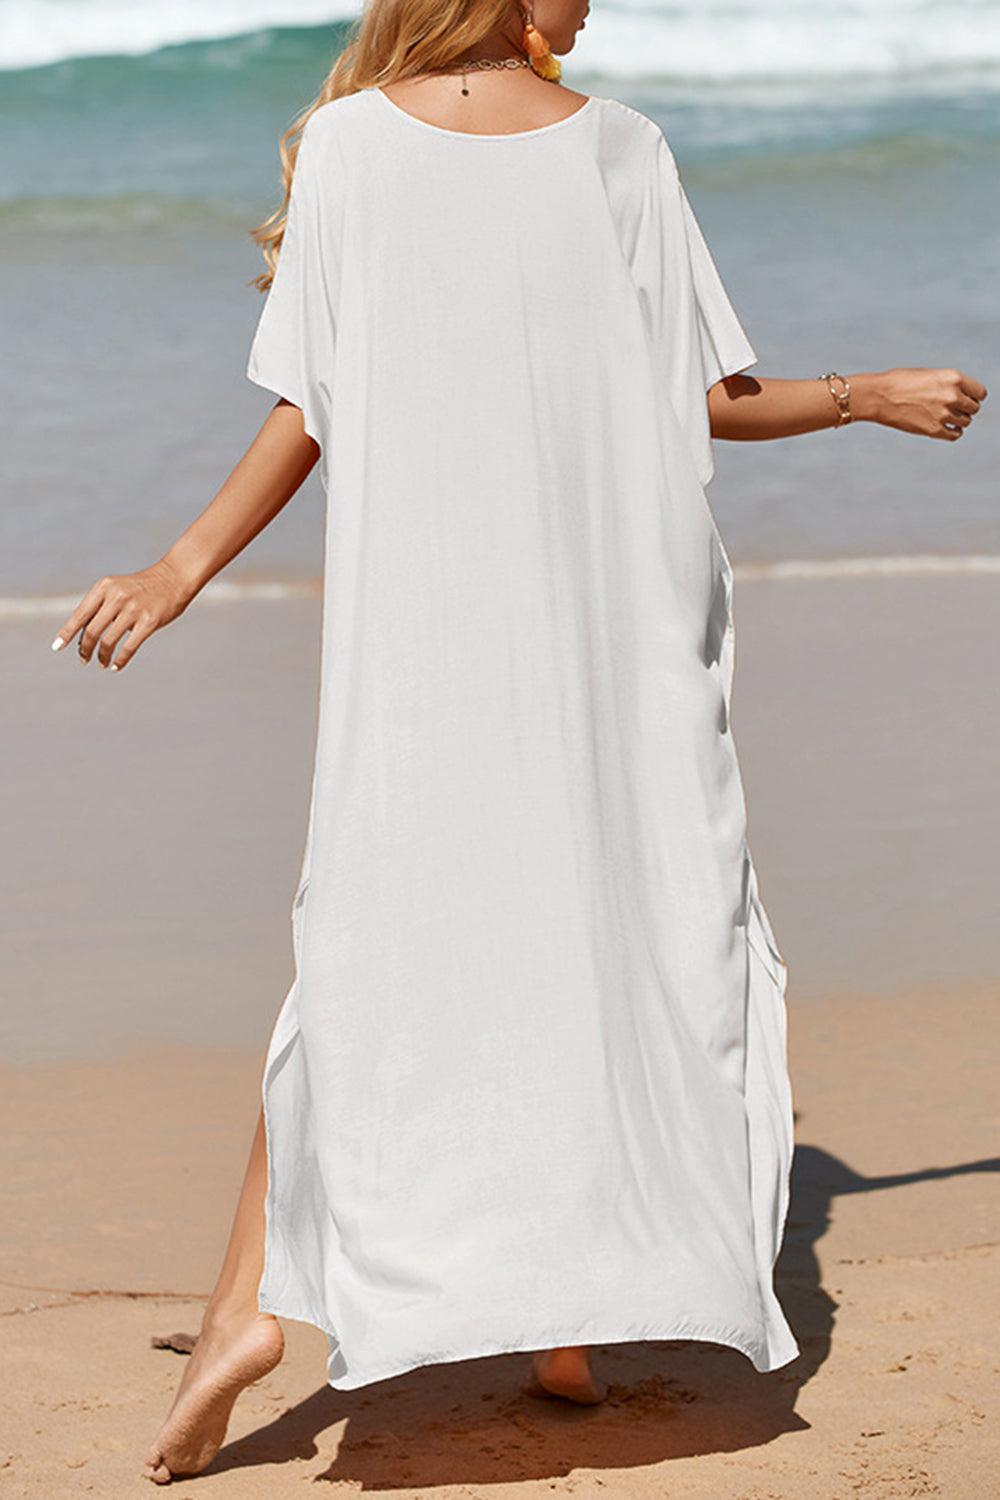 a woman in a white dress walking on the beach